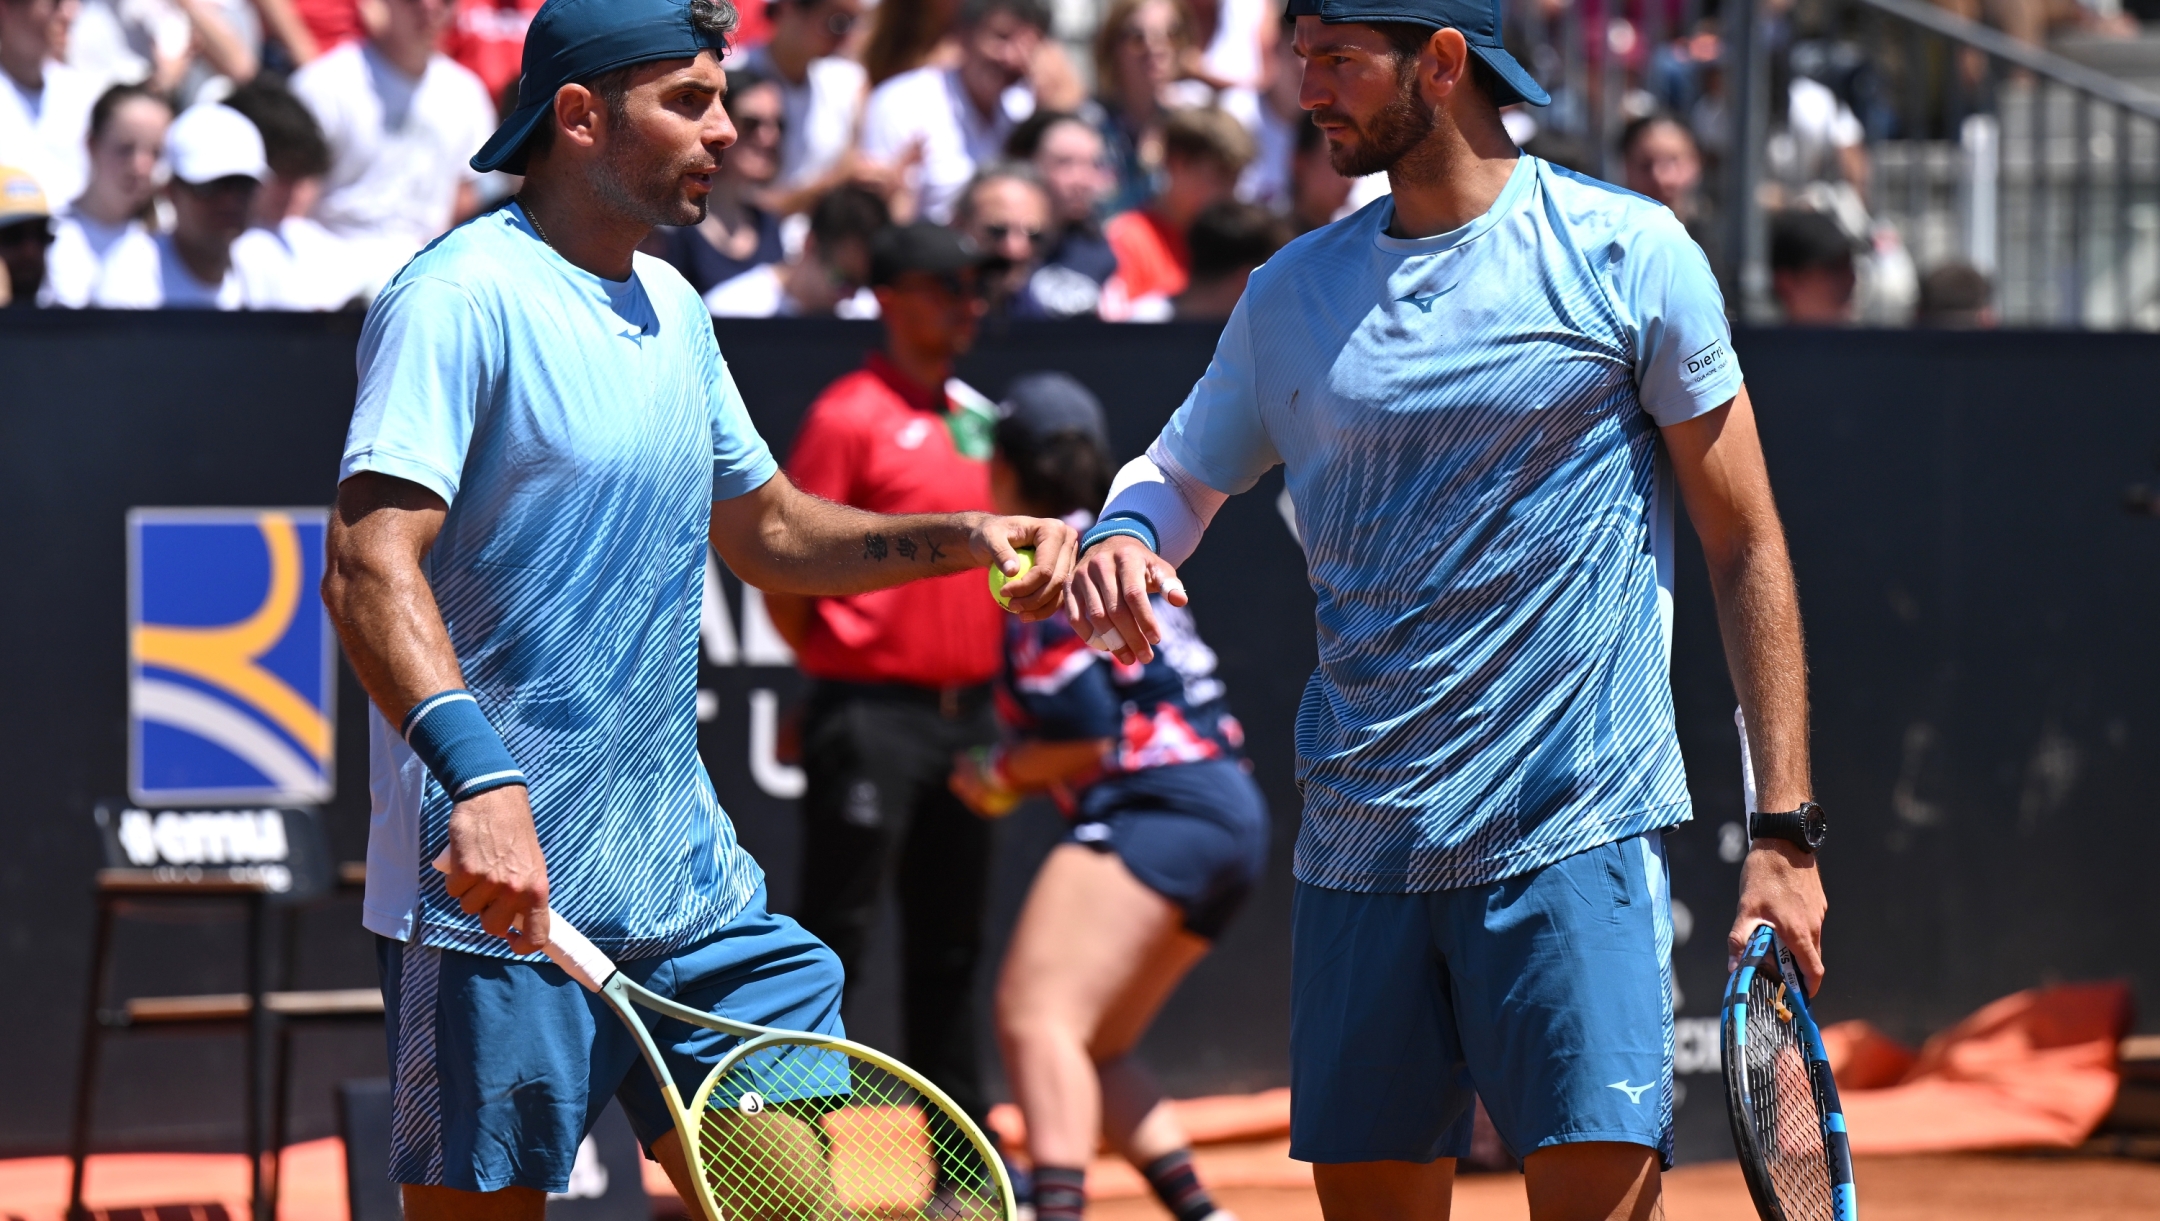 ROME, ITALY - MAY 14: Simone Bolelli and Andrea Vavassori of Italy interact during their Men's Doubles Round of 16 match against Rohan Bopanna of India and Matthew Ebden of Australia on Day Nine of Internazionali BNL D'Italia at Foro Italico on May 14, 2024 in Rome, Italy. (Photo by Mike Hewitt/Getty Images)